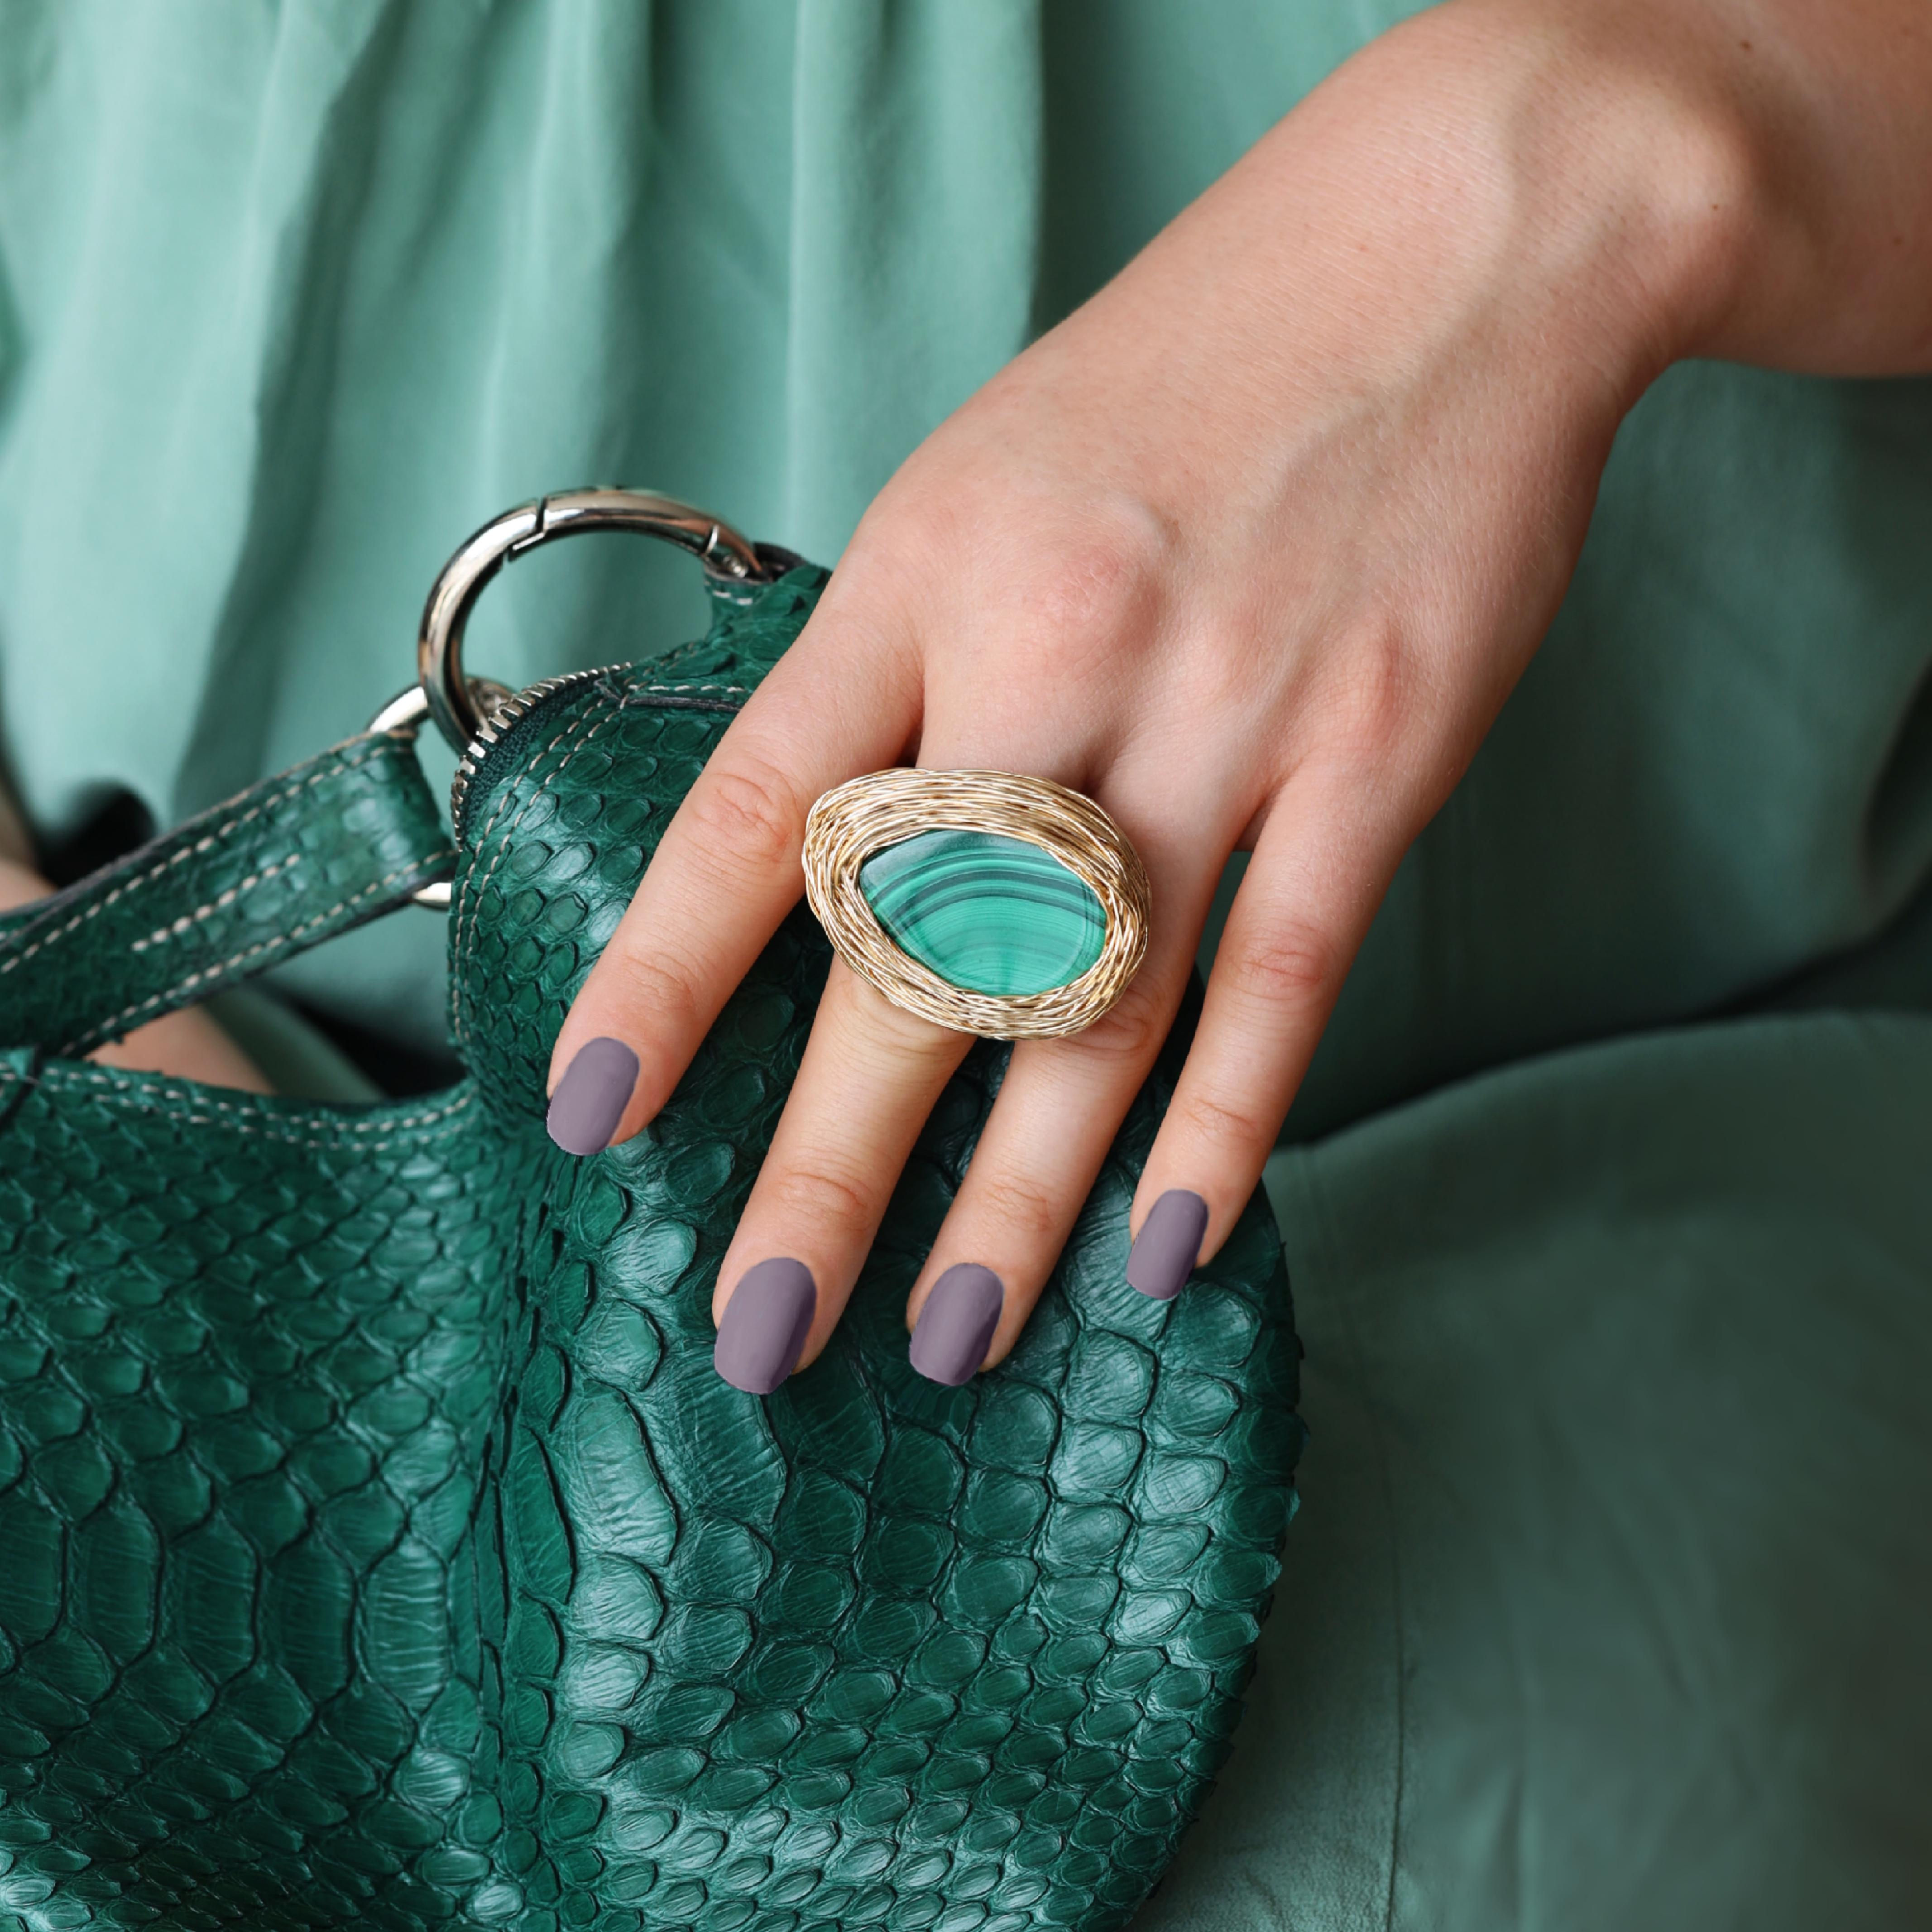 ‘Gwen’ … a beautiful shiny green malachite drop ring with a pure approach. She is simply the right kind of minimal cocktail ring.. and comes with character. The drop in itself is a classic shape and this kind of green colour is simply magical.